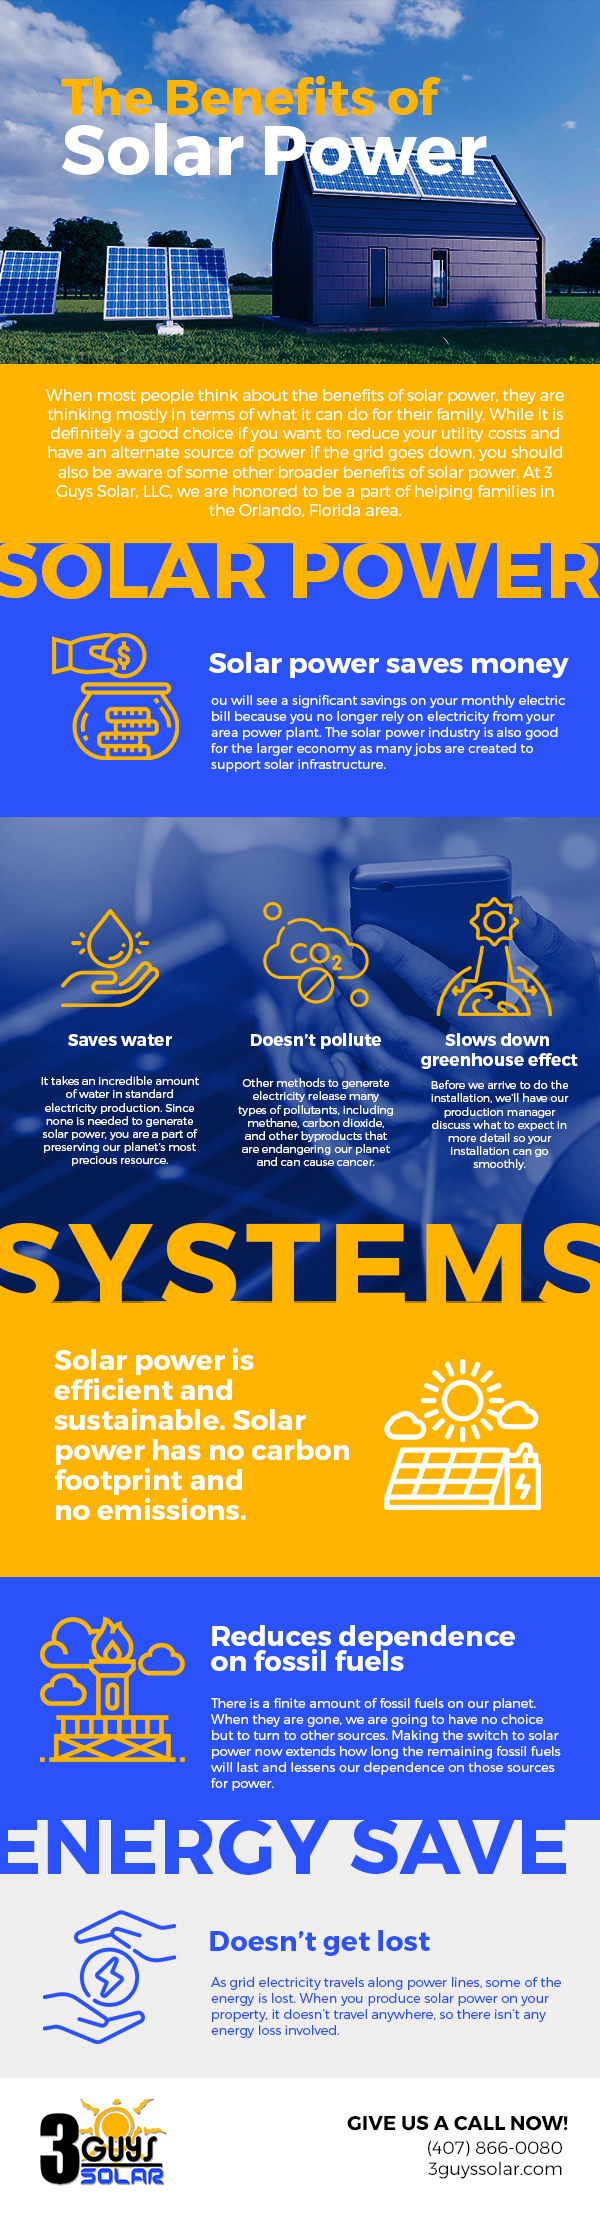 The Benefits of Solar Power [infographic]